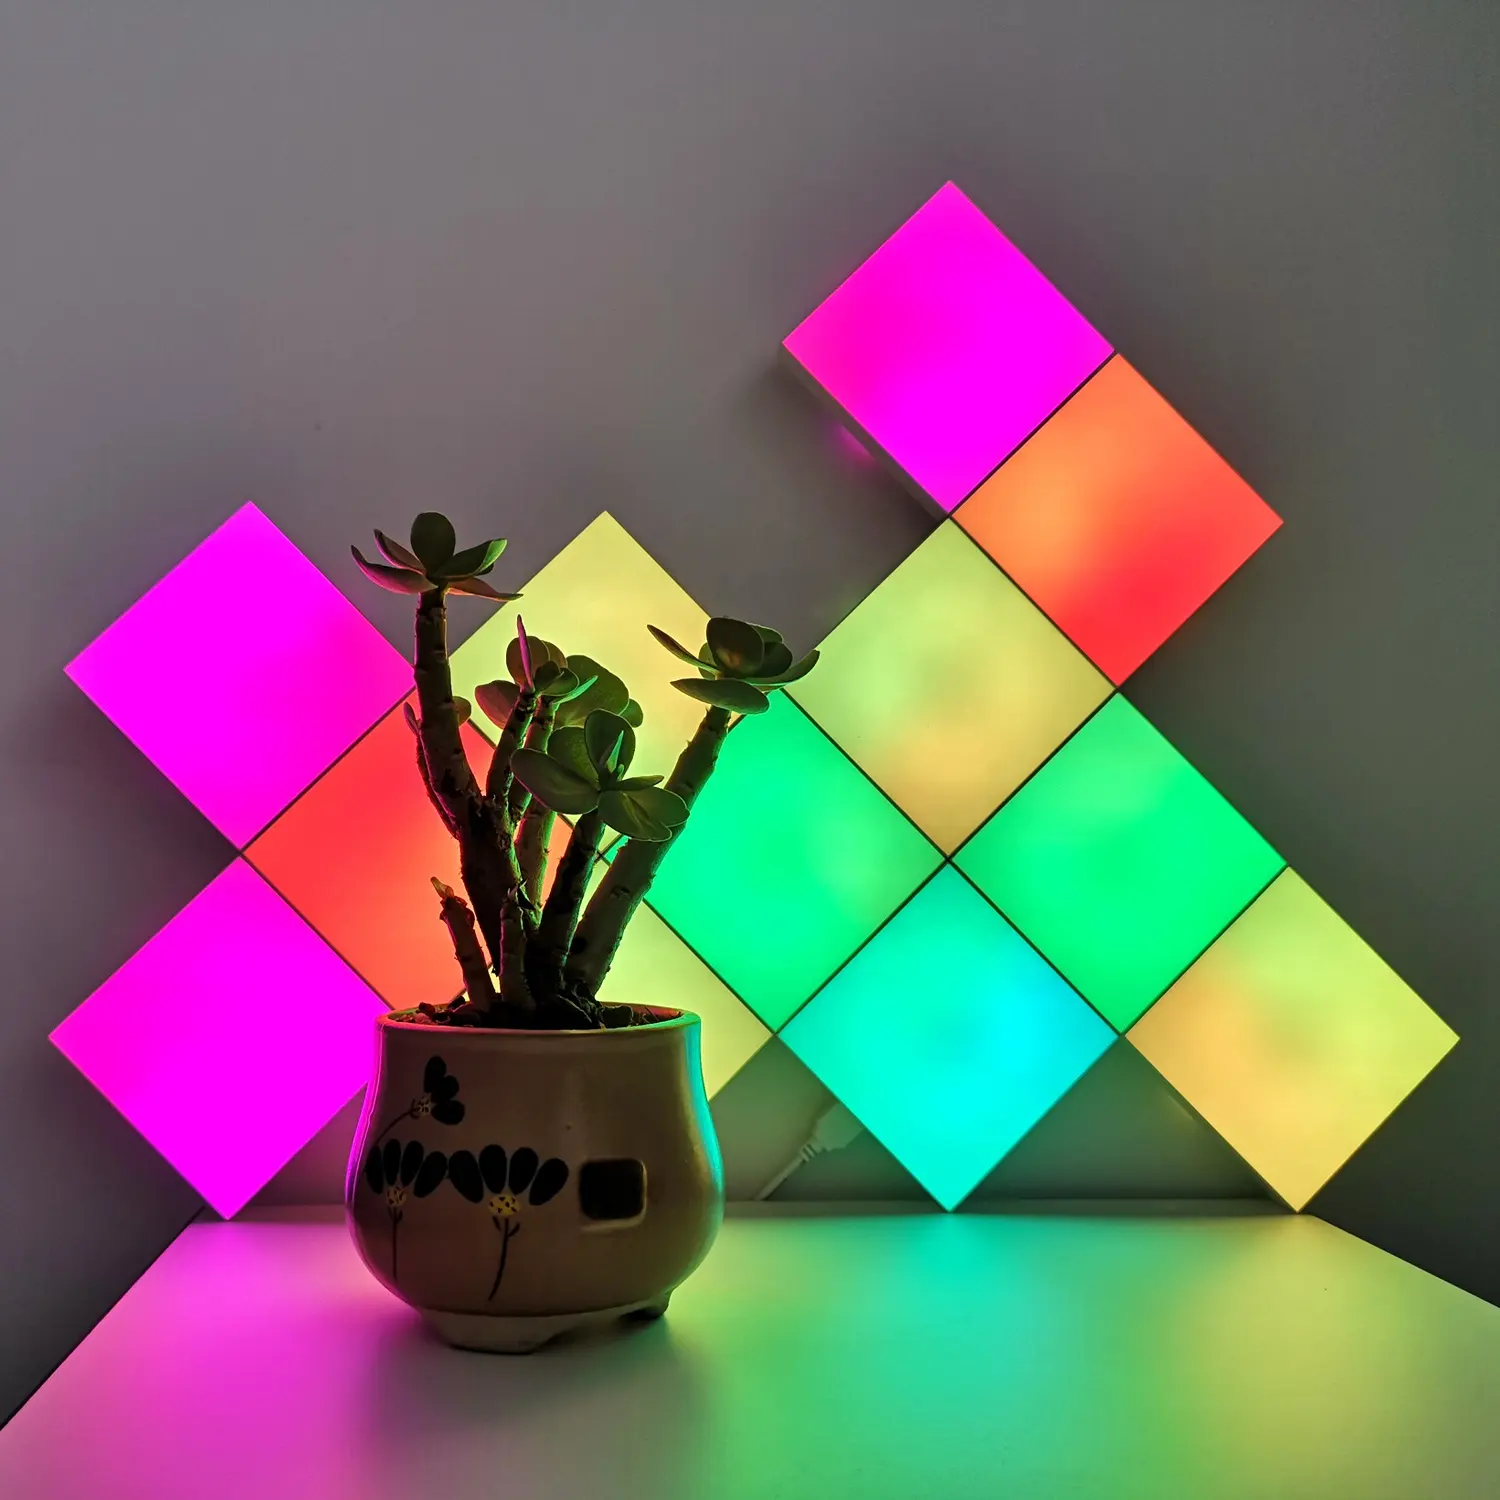 Wholesale Price best seller Led honeycomb tile Light wall Square Mounted Lamp For Gaming room setup Decoration